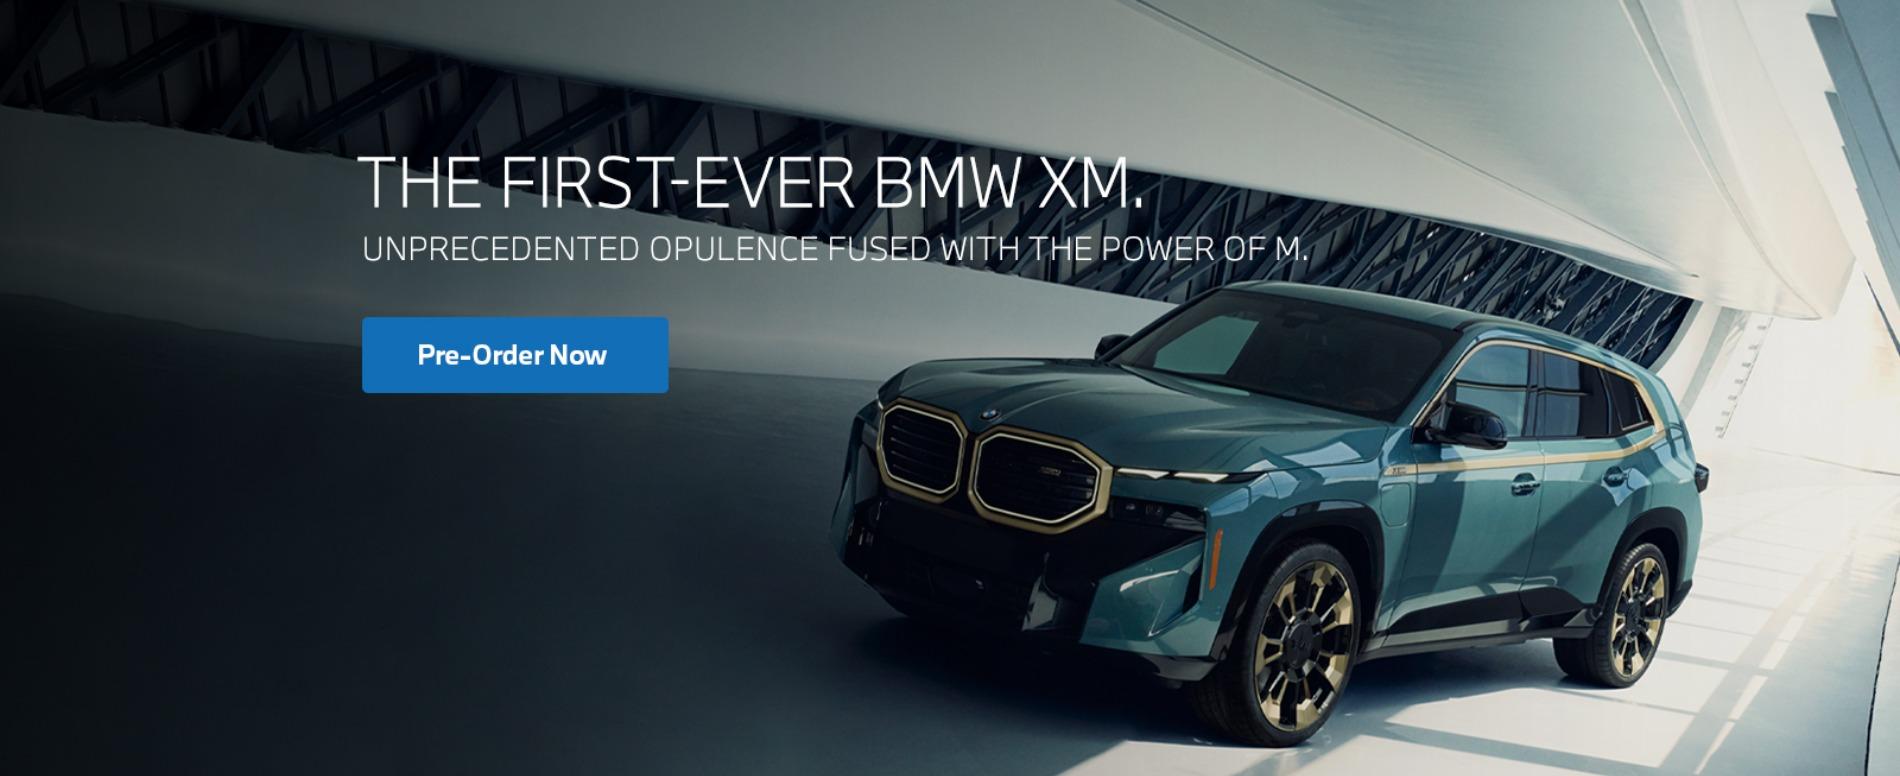 The First-Ever BMW XM Reserve Yours Today